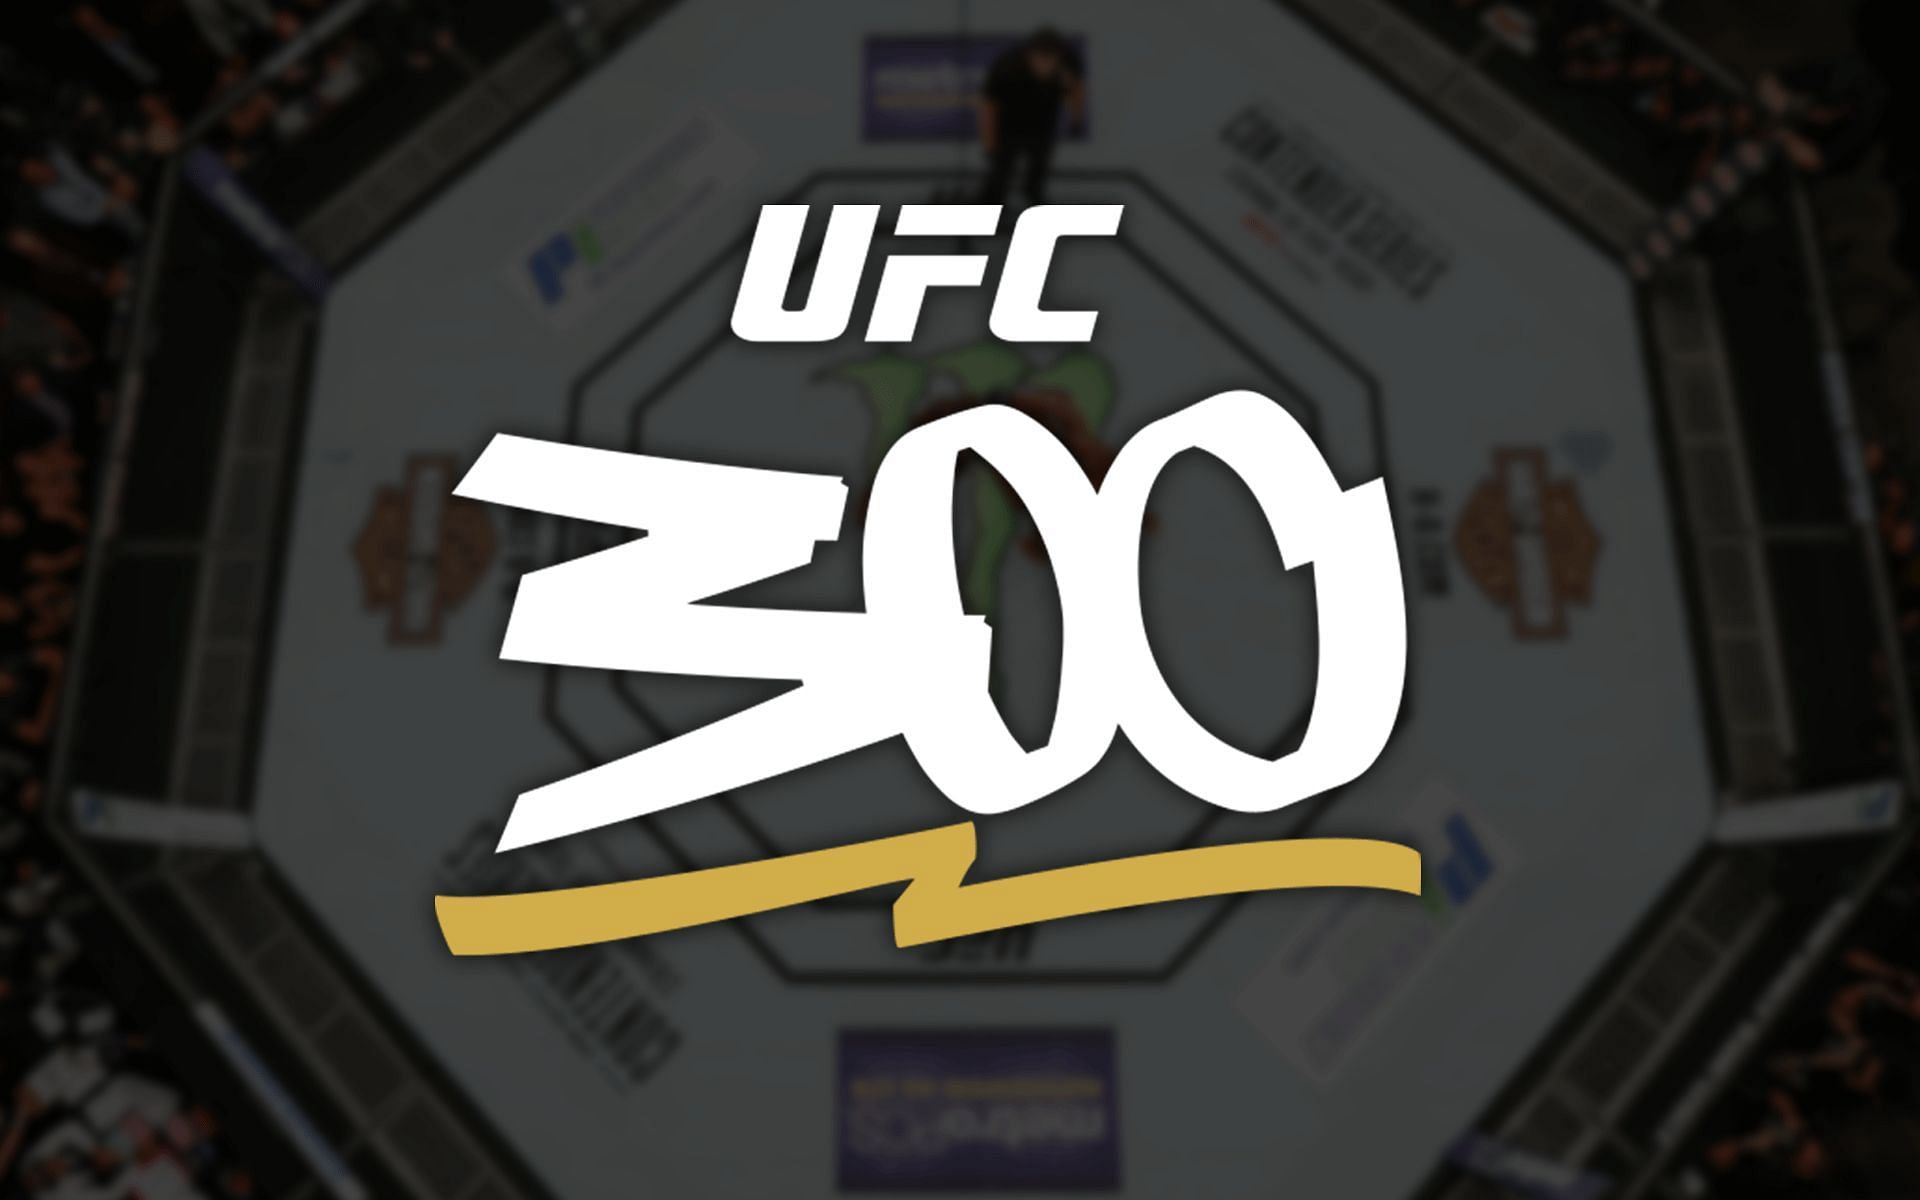 UFC 300 is scheduled to go down on April 13 at the T-Mobile Arena in Las Vegas [Image via Getty Images]